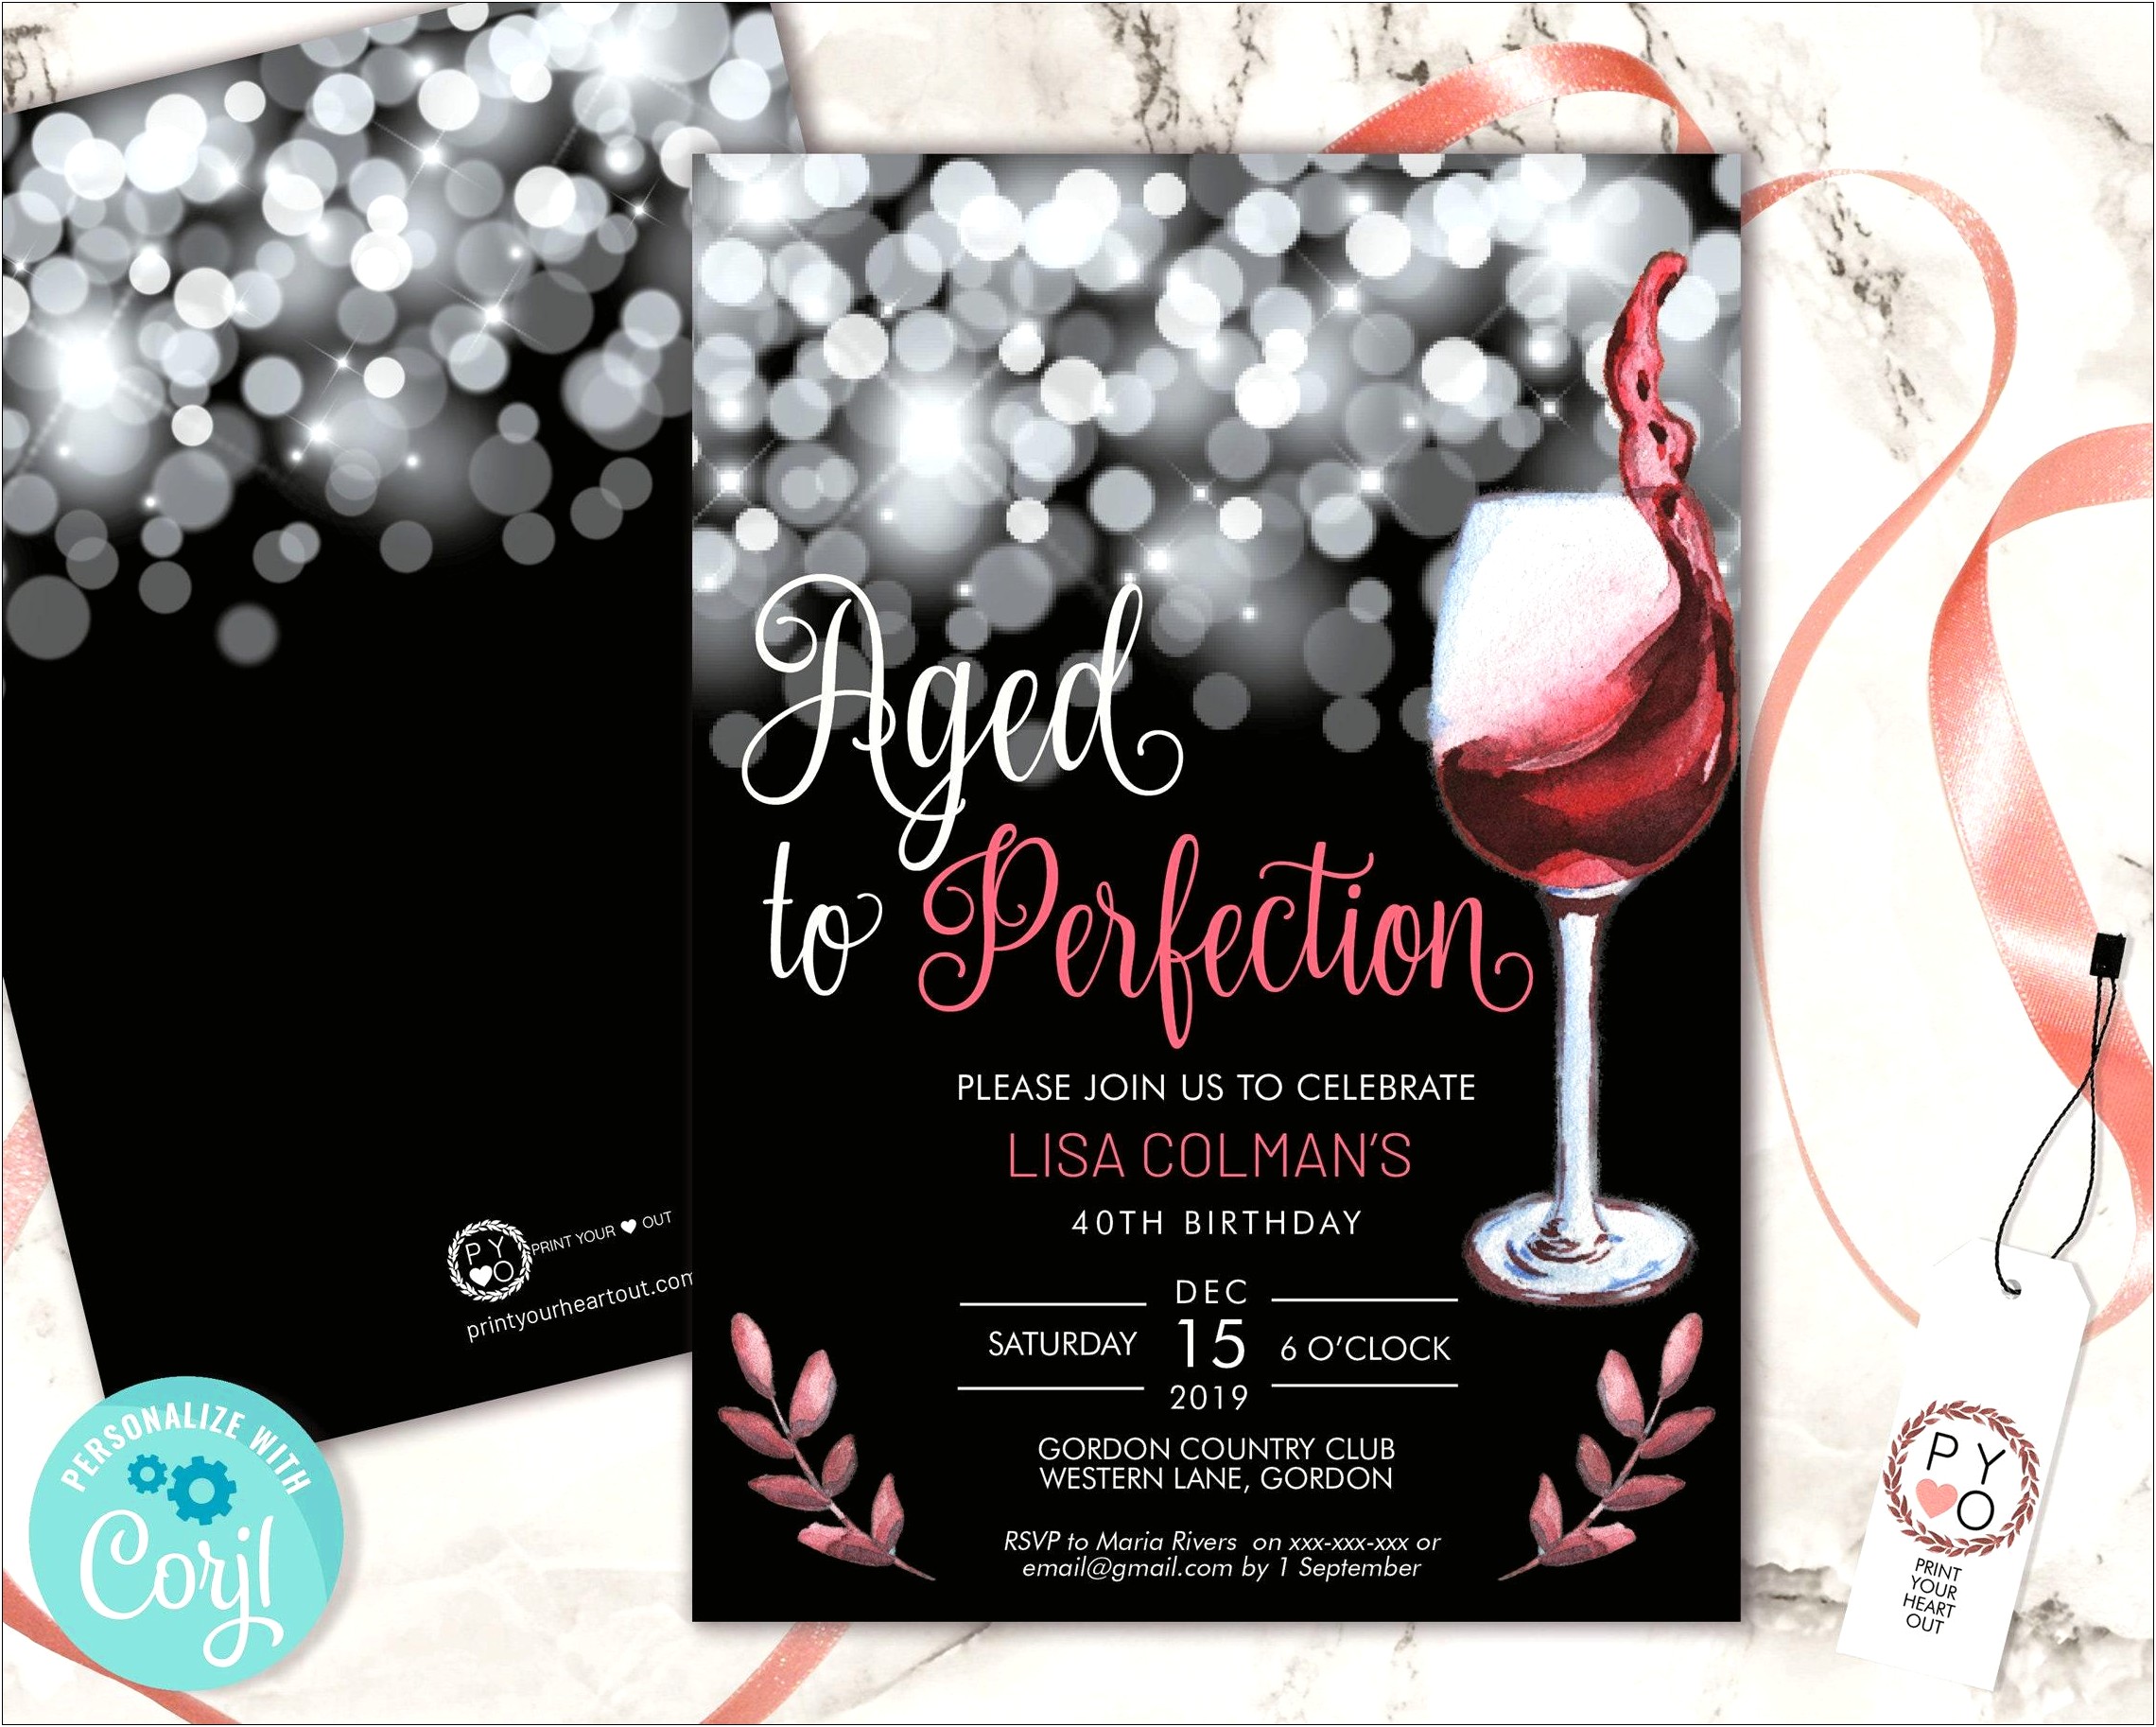 Aged To Perfection Invitation Free Template